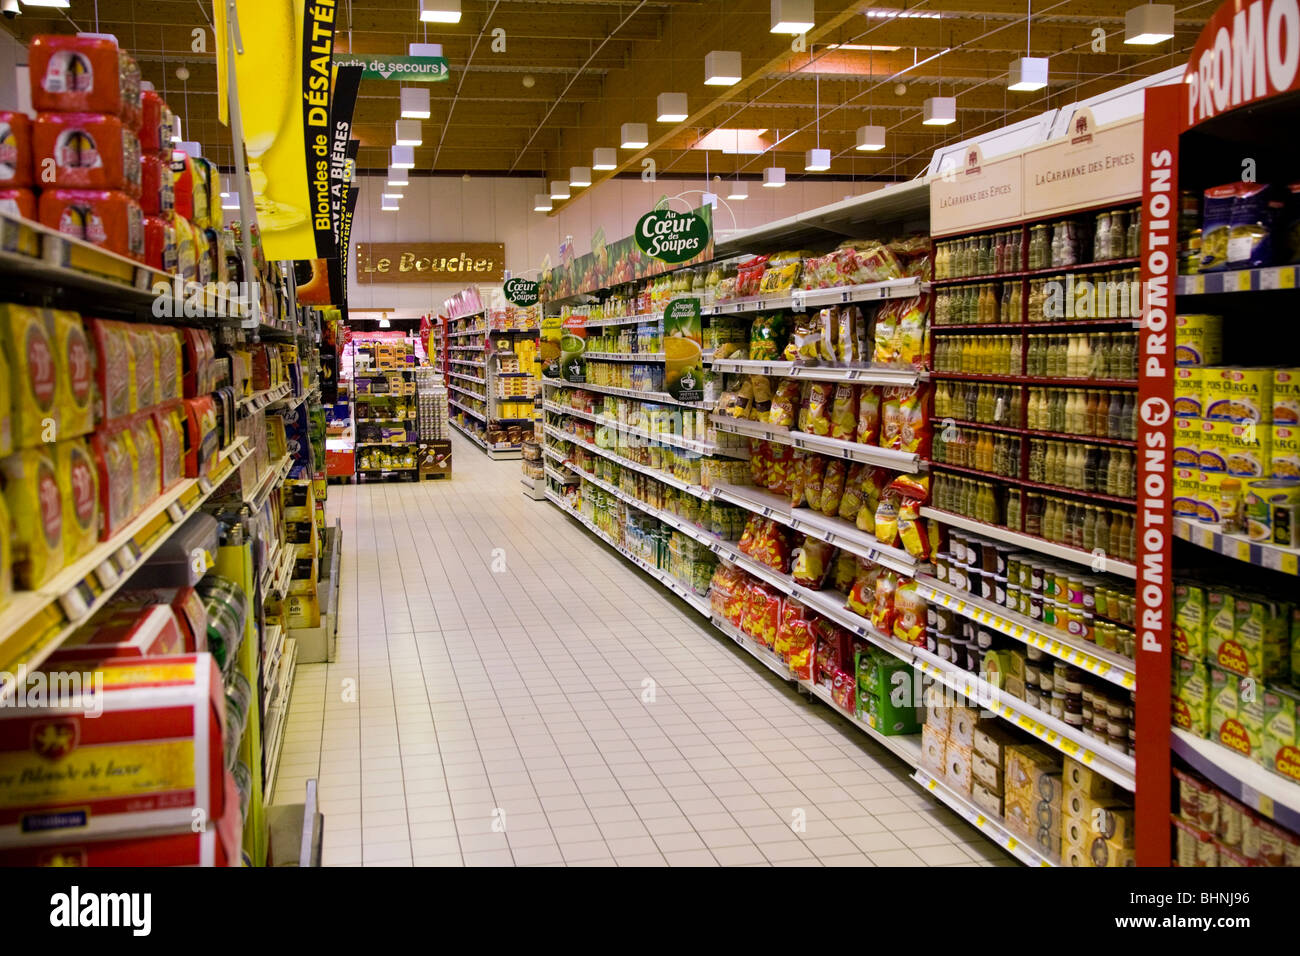 Looking down a supermarkets aisle in a French supermarket. France. Stock Photo